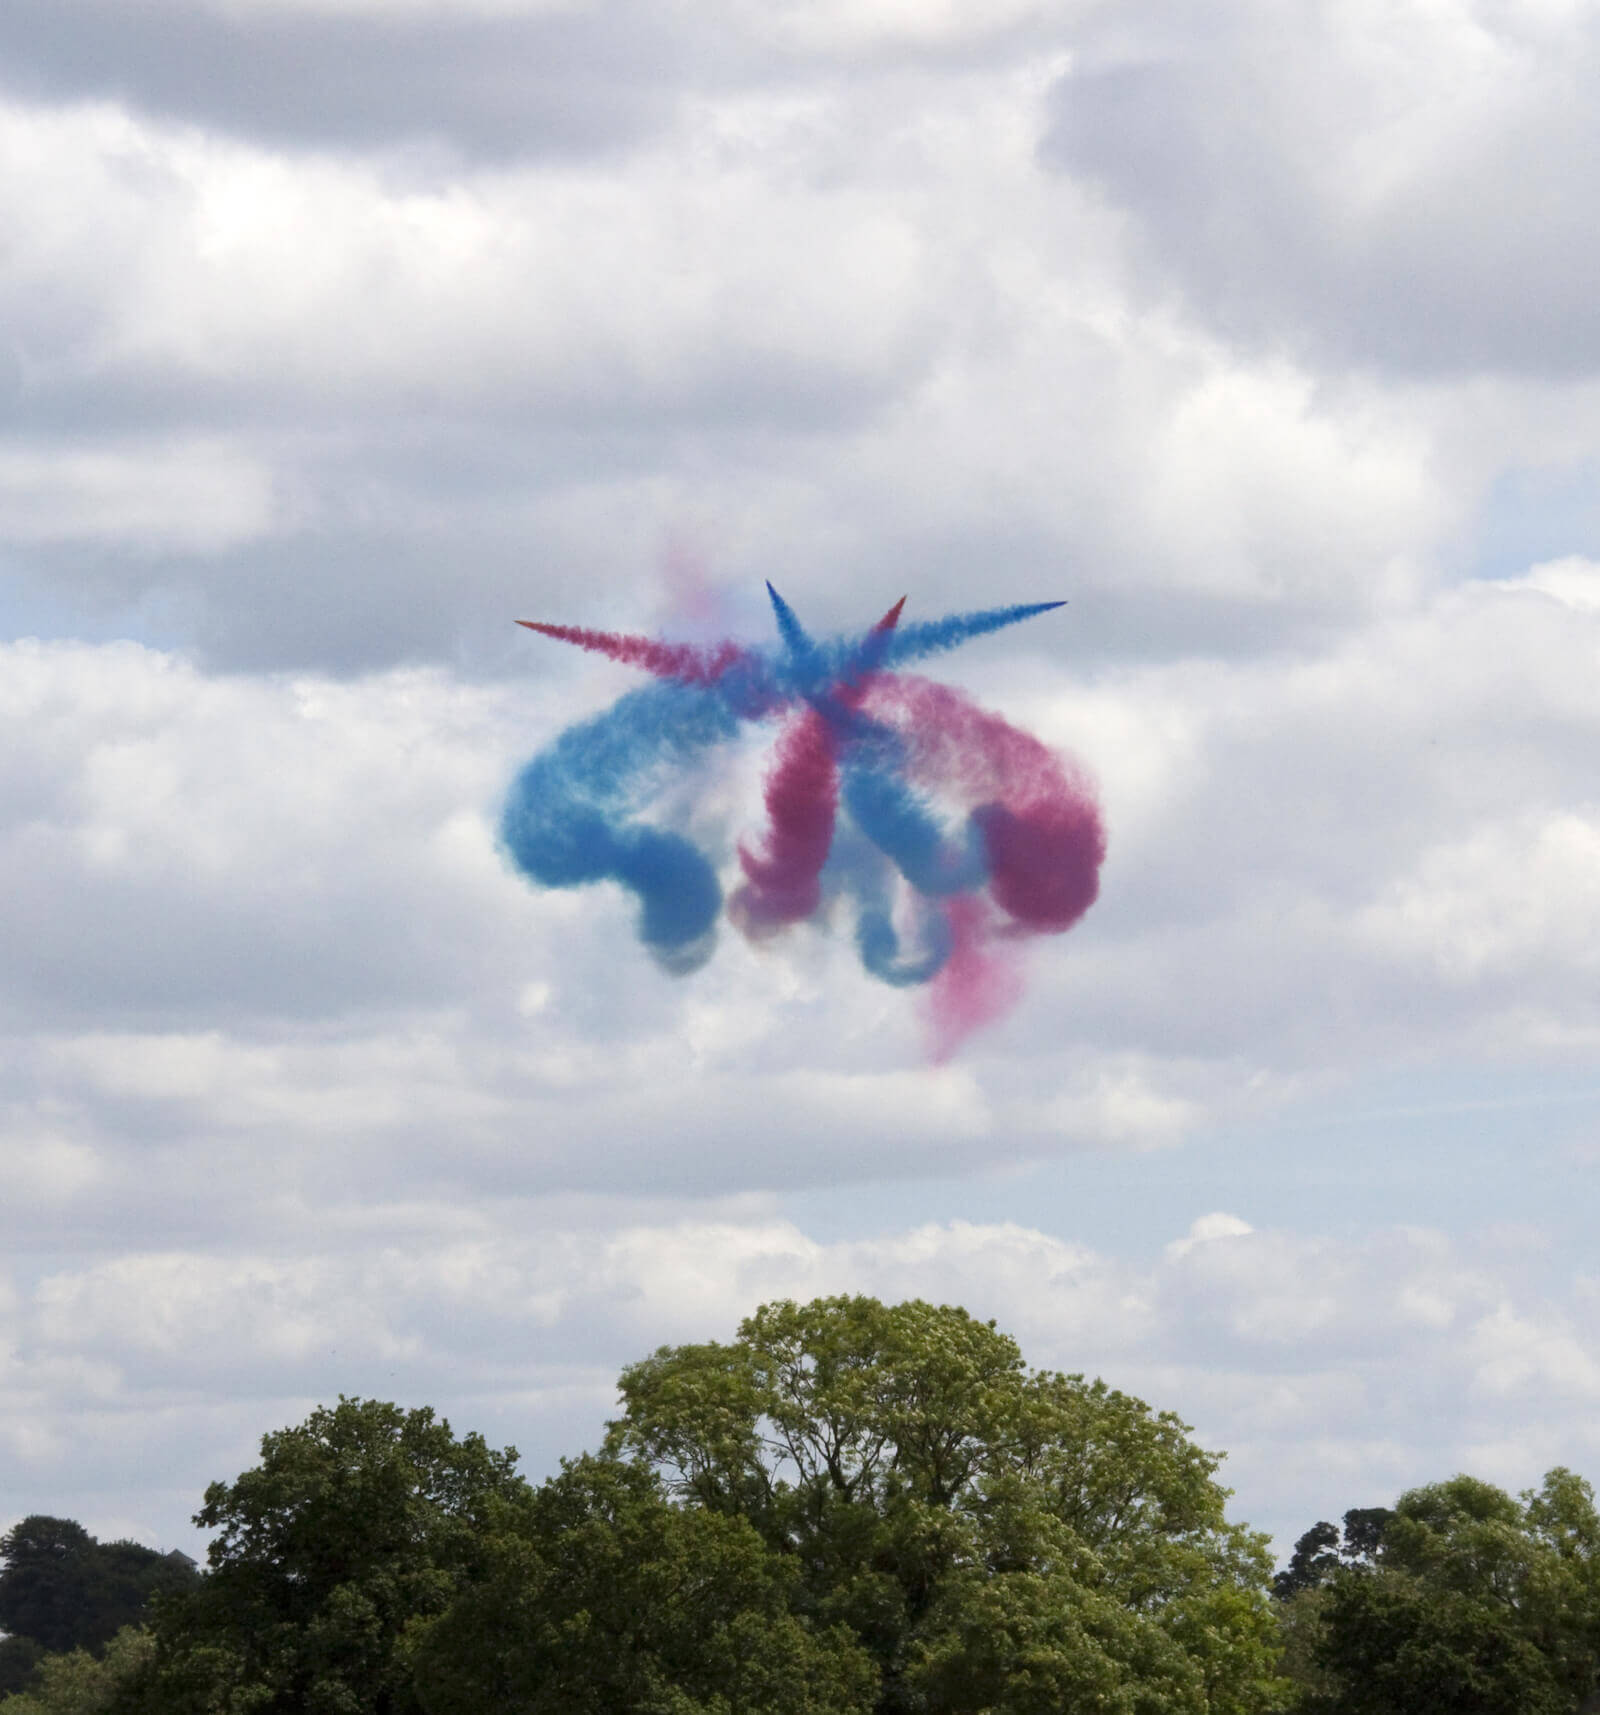 Original image - Red Arrows tying knots, by Tony Hisgett from Birmingham, UK under the Creative Commons Attribution 2.0 Generic License CC BY 2.0 (https://creativecommons.org/licenses/by/2.0/legalcode)